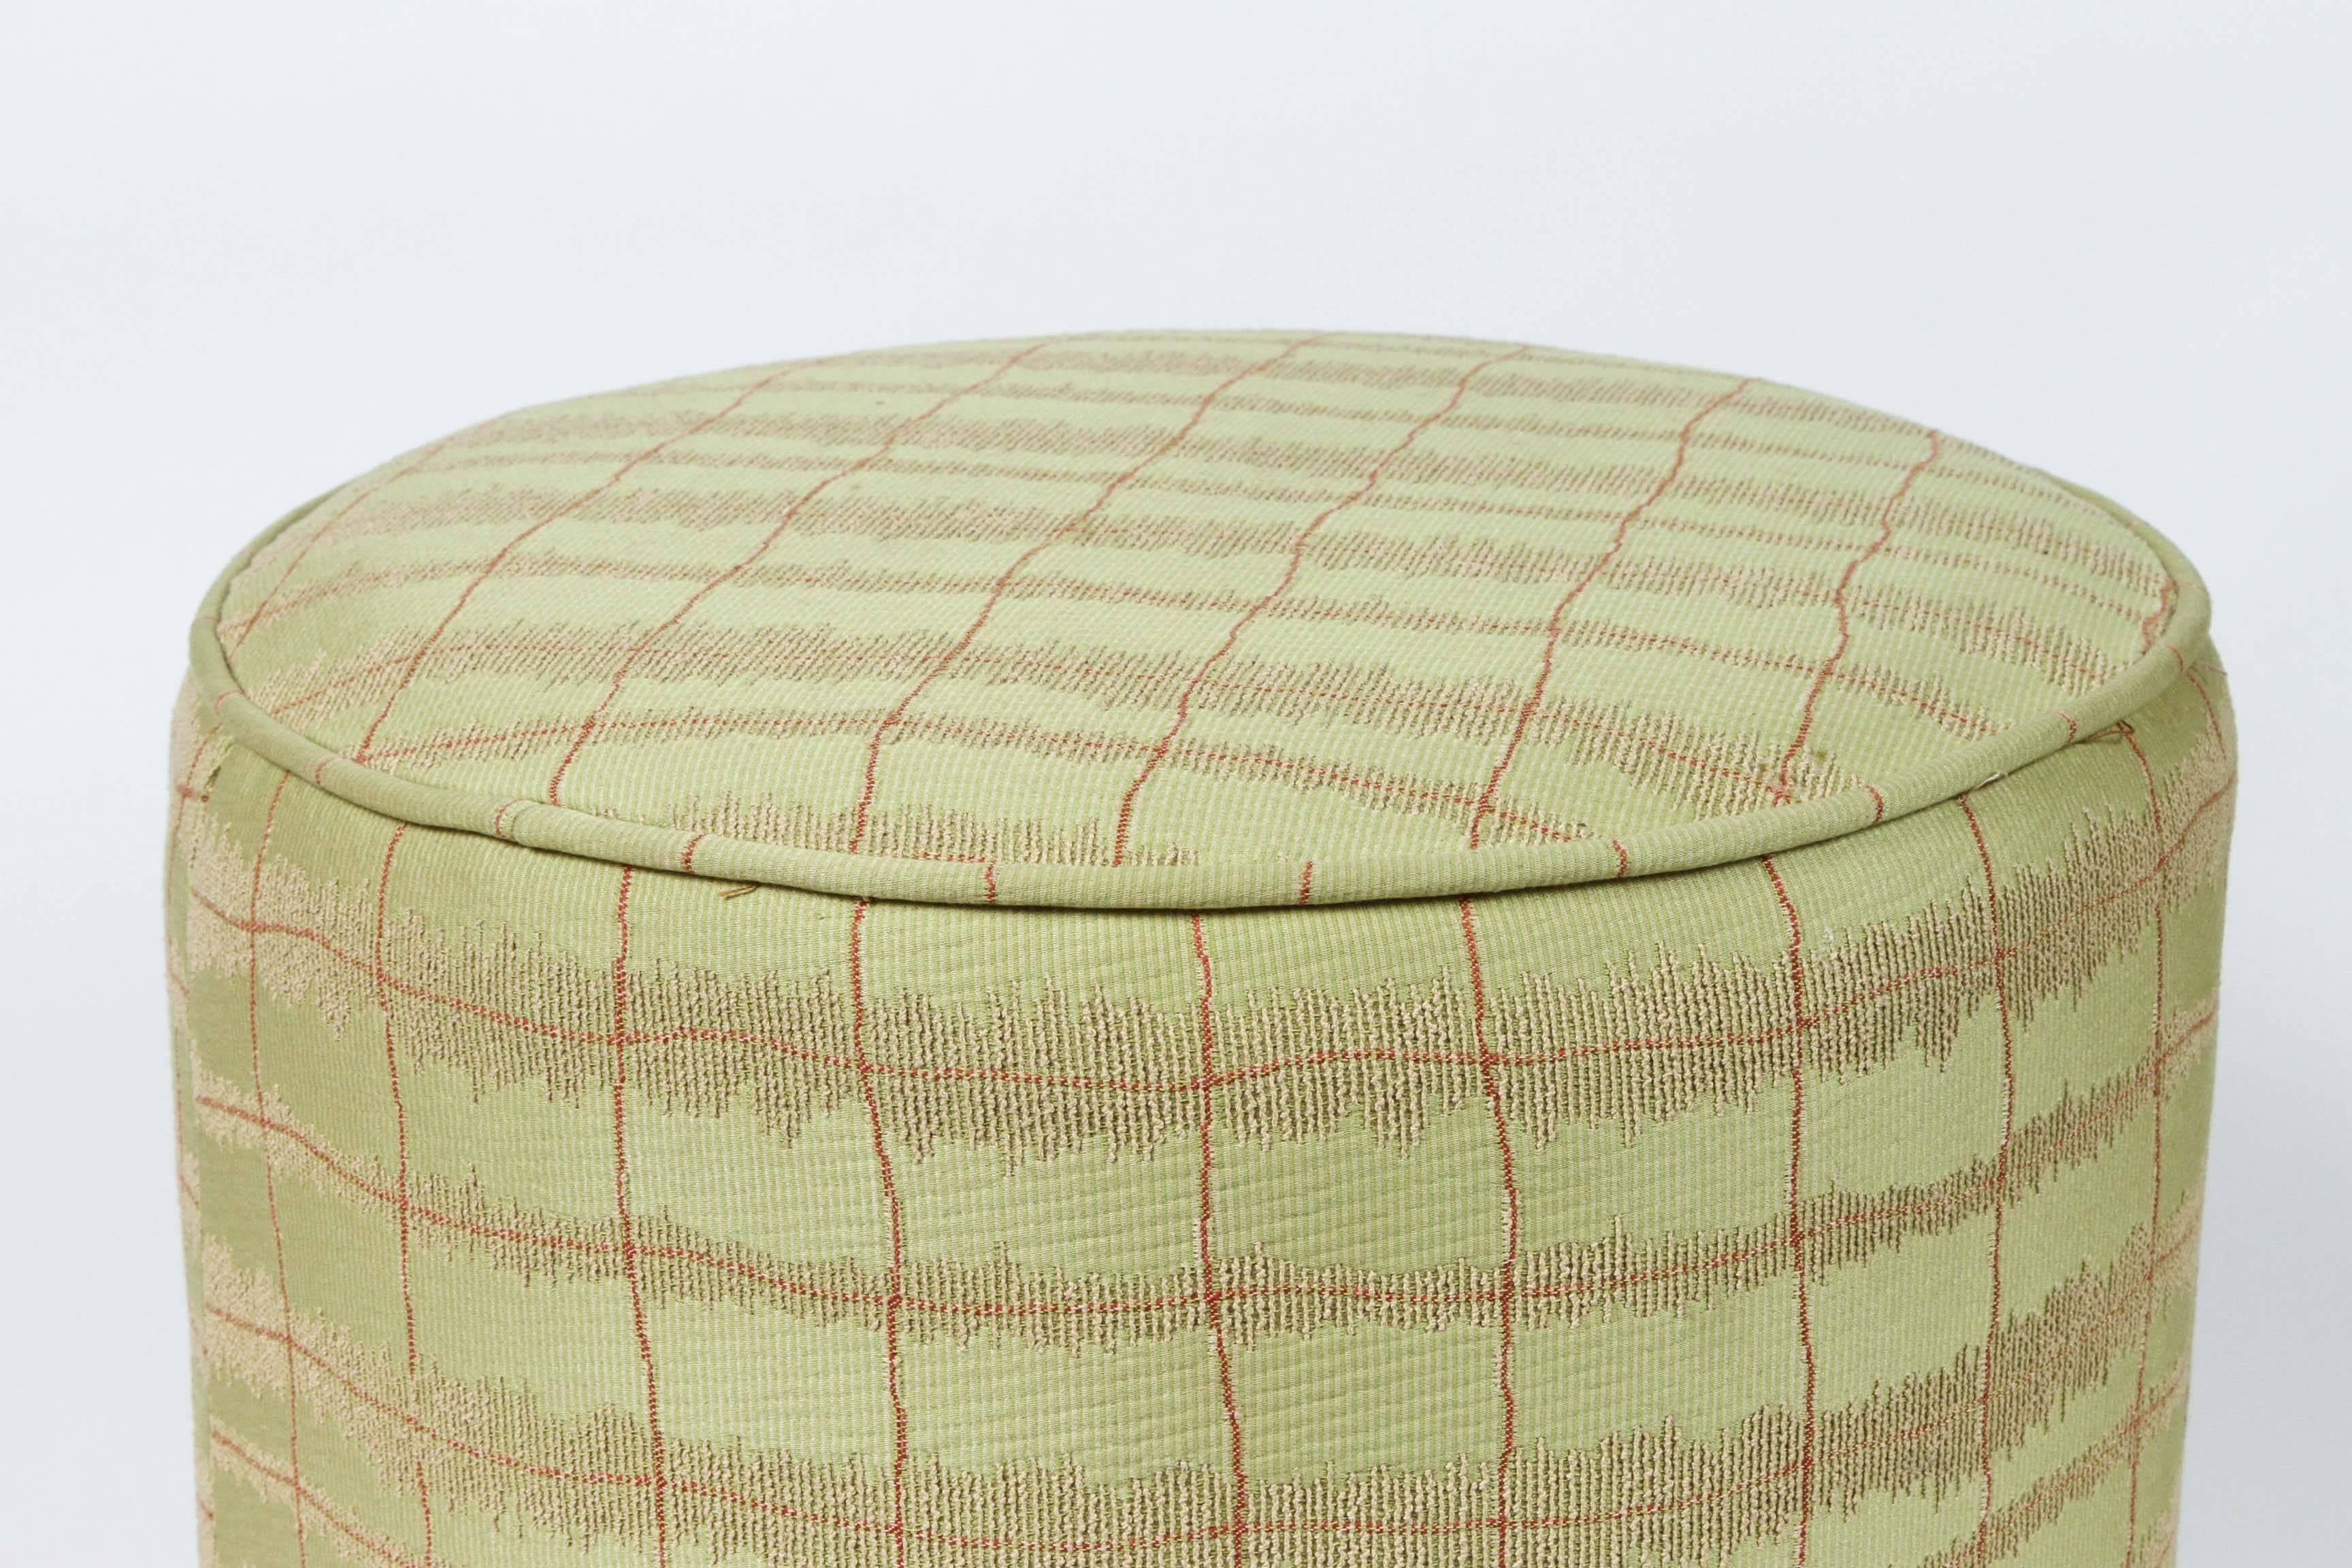 Art Deco Style stool in lime green and gold Moroccan style stool, vanity stool.
Modern contemporary round Moroccan Art Deco style upholstered stools in green fabric upholstery in 1970s style.
Moroccan little pouf hassock, upholstered footstool or